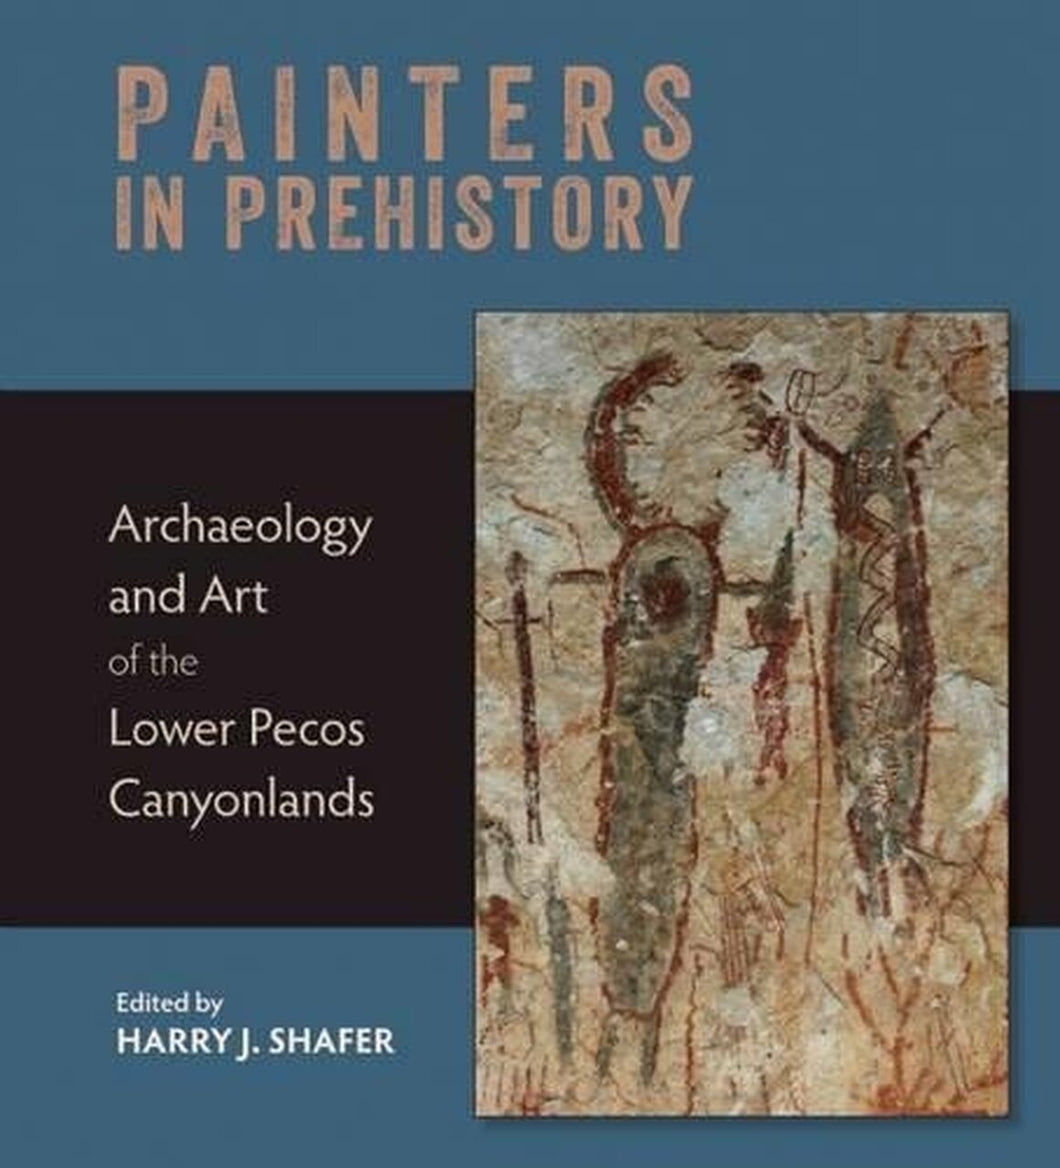 Painters in Prehistory (Archaeology and Art of the Lower Pecos Canyonlands)